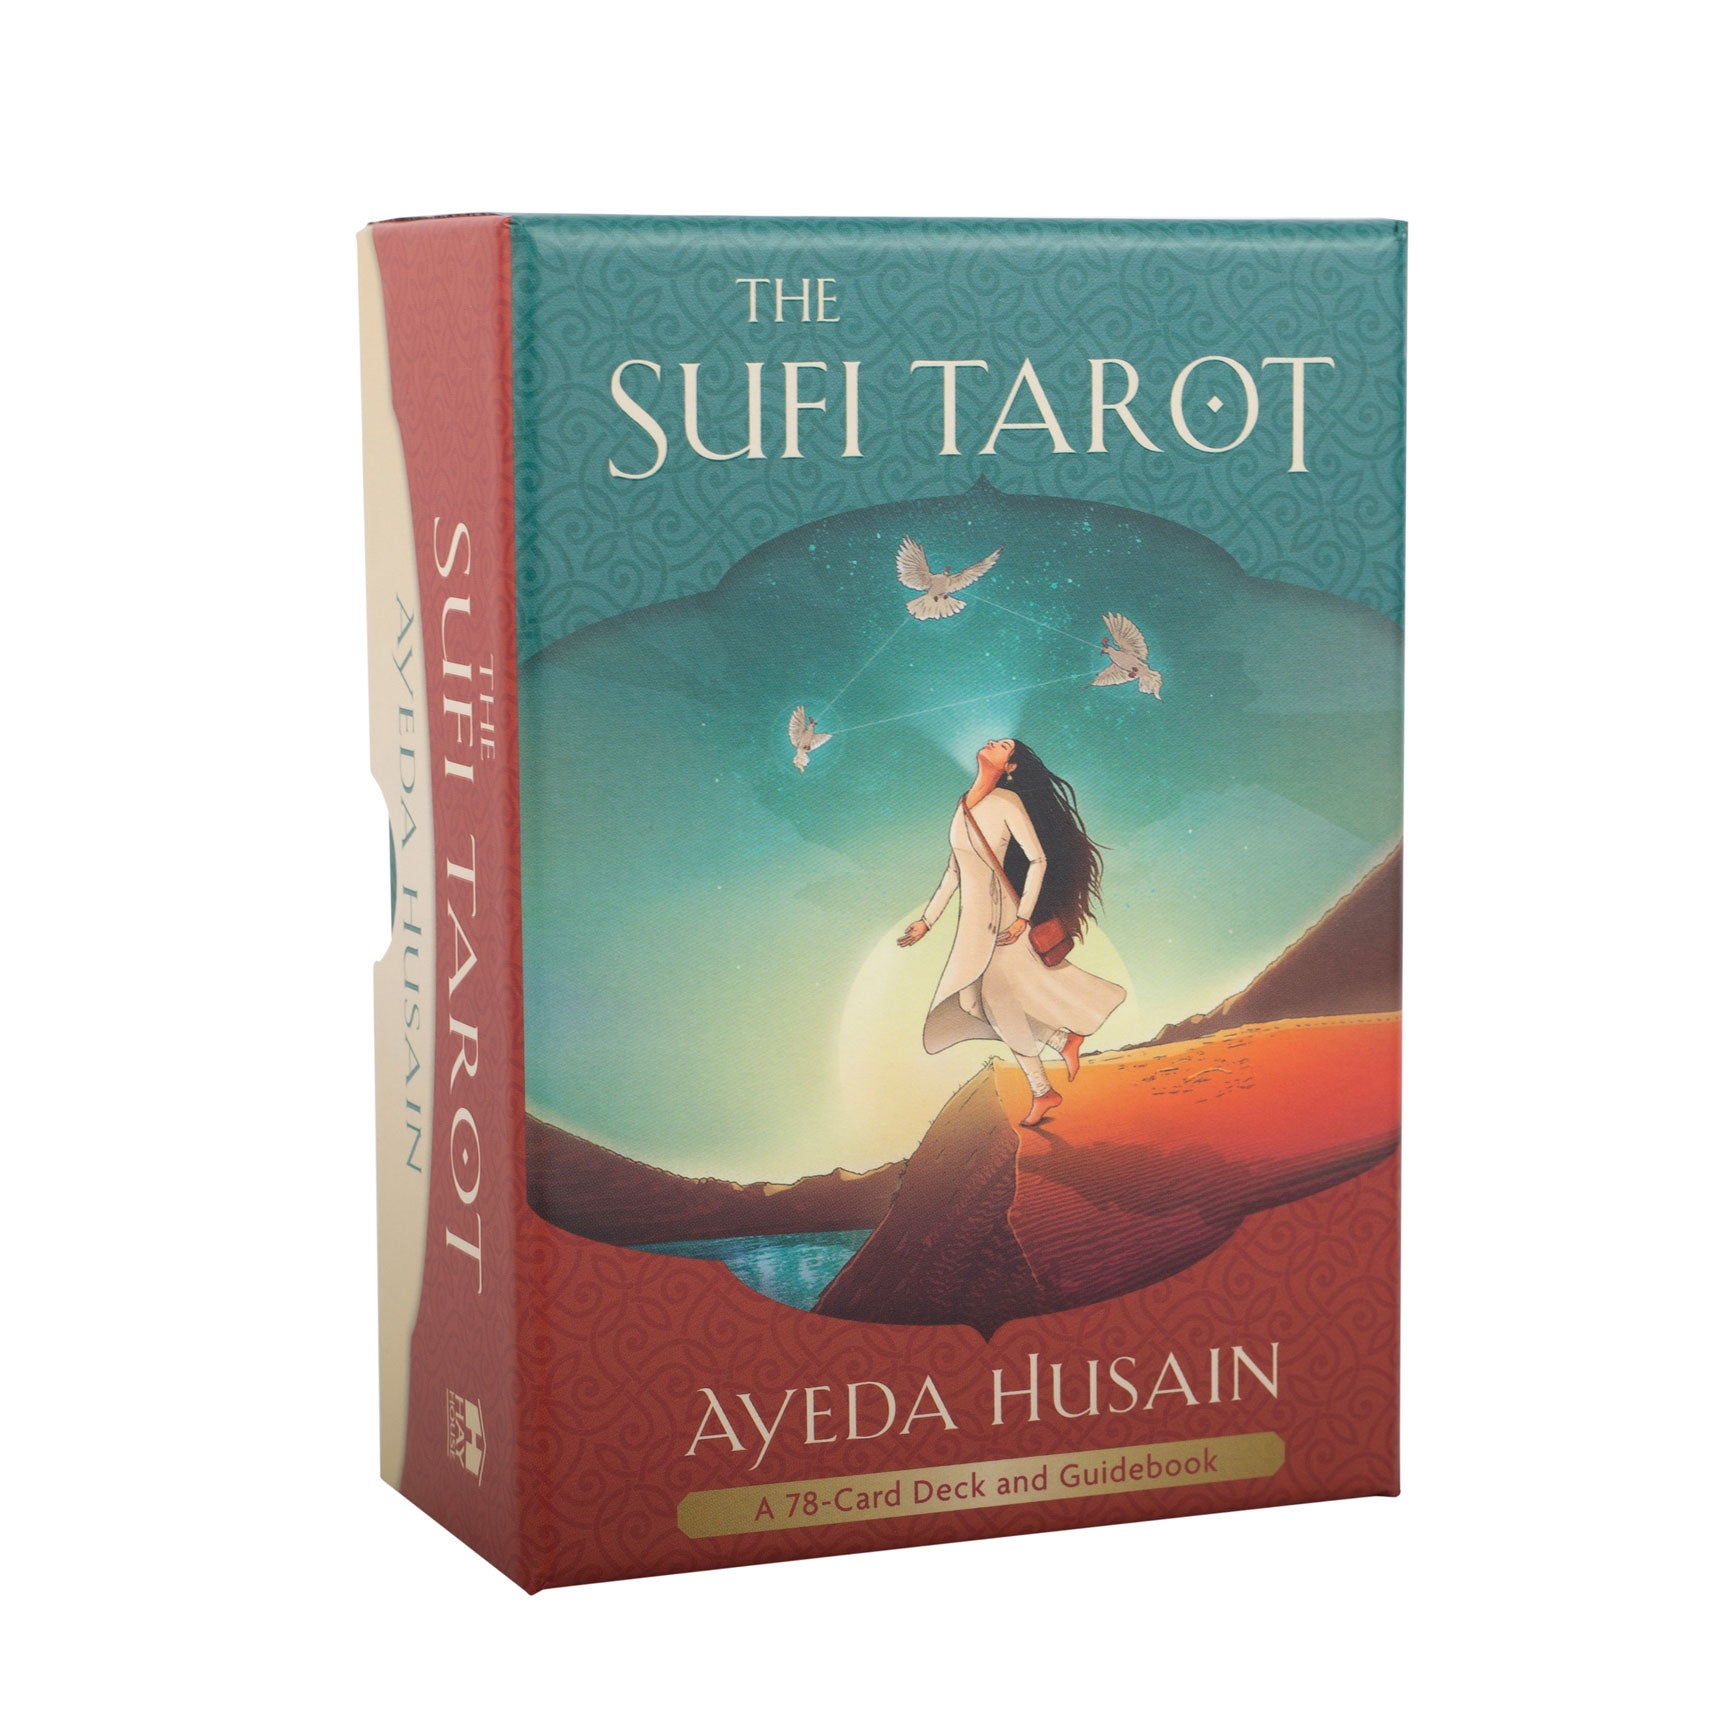 View The Sufi Tarot Cards information